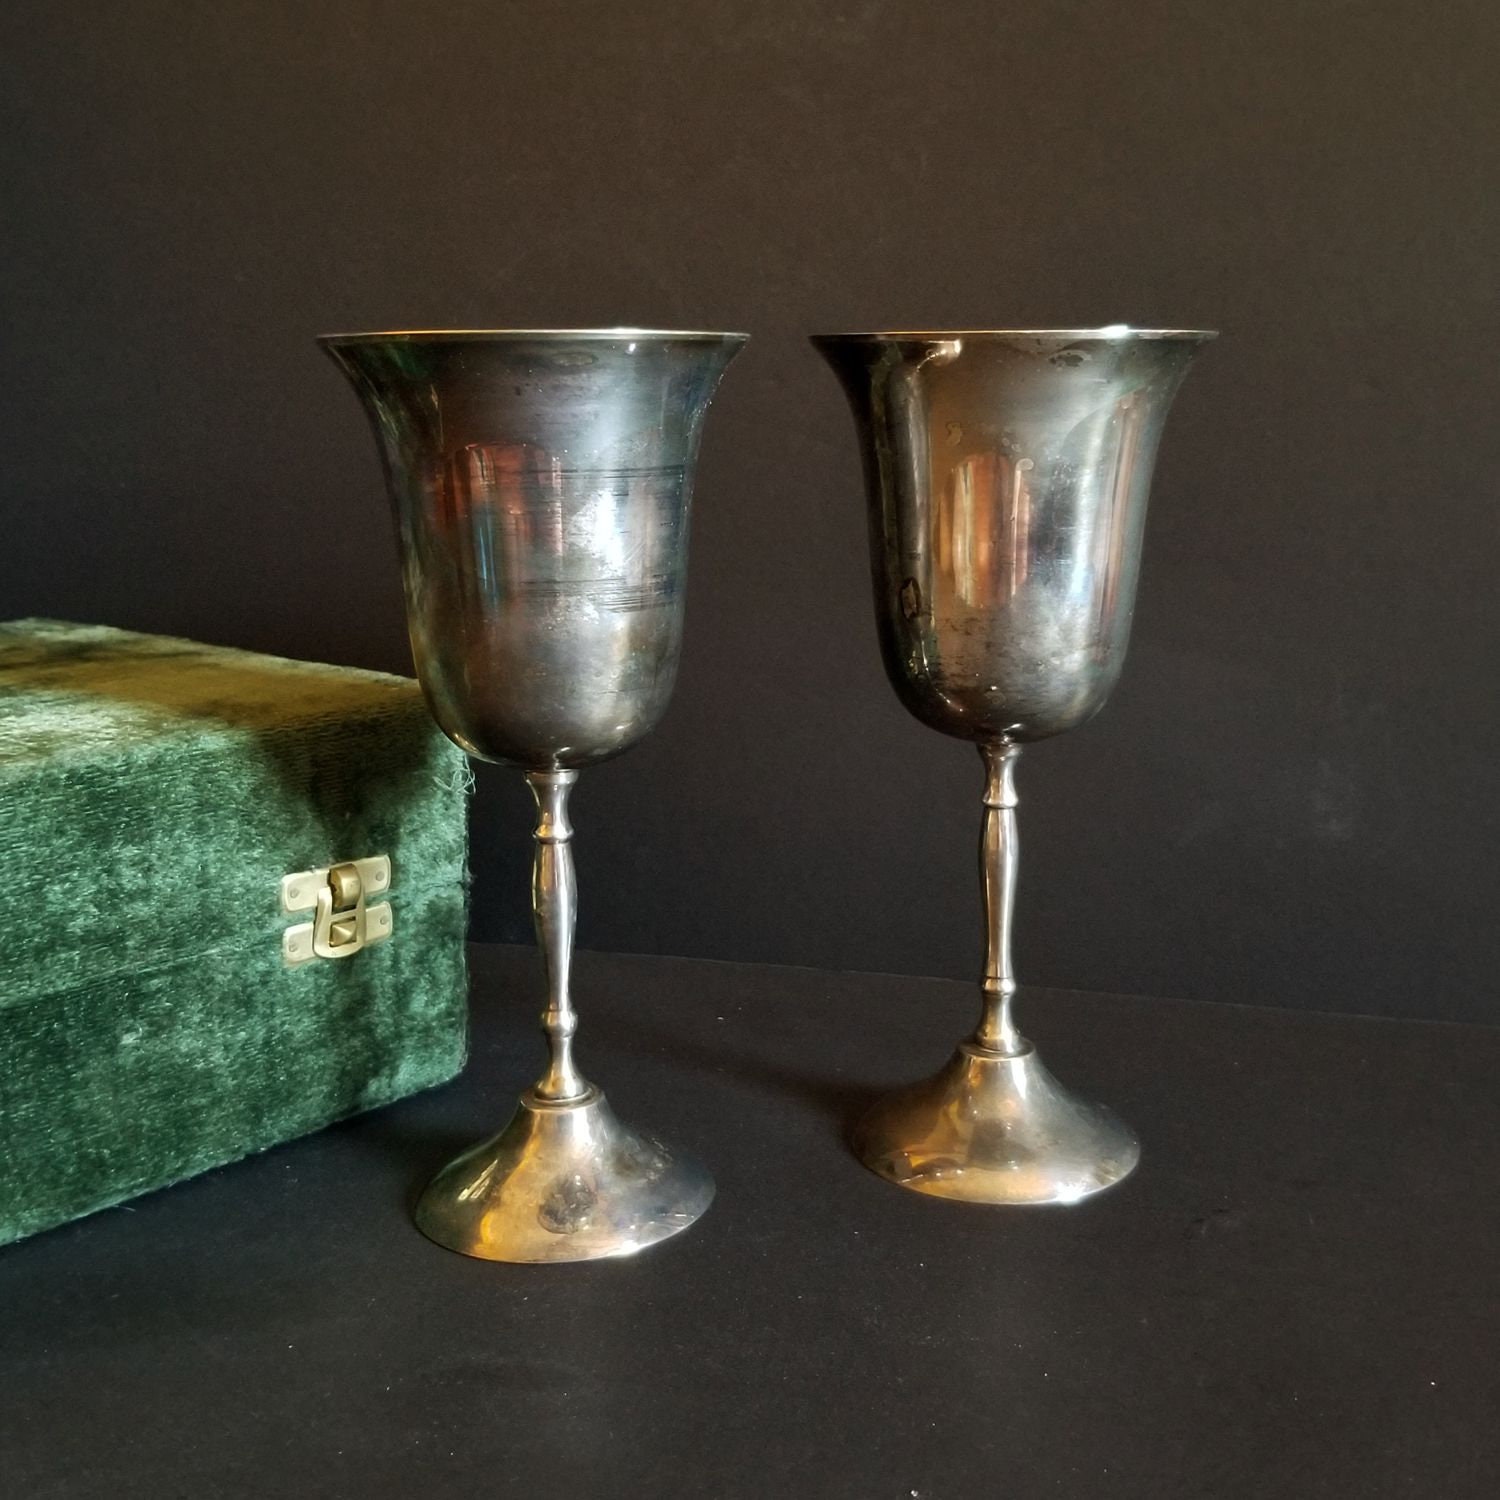 7 x vintage goblet chalice hammered metal wine glasses cups cup lot India  mfg.